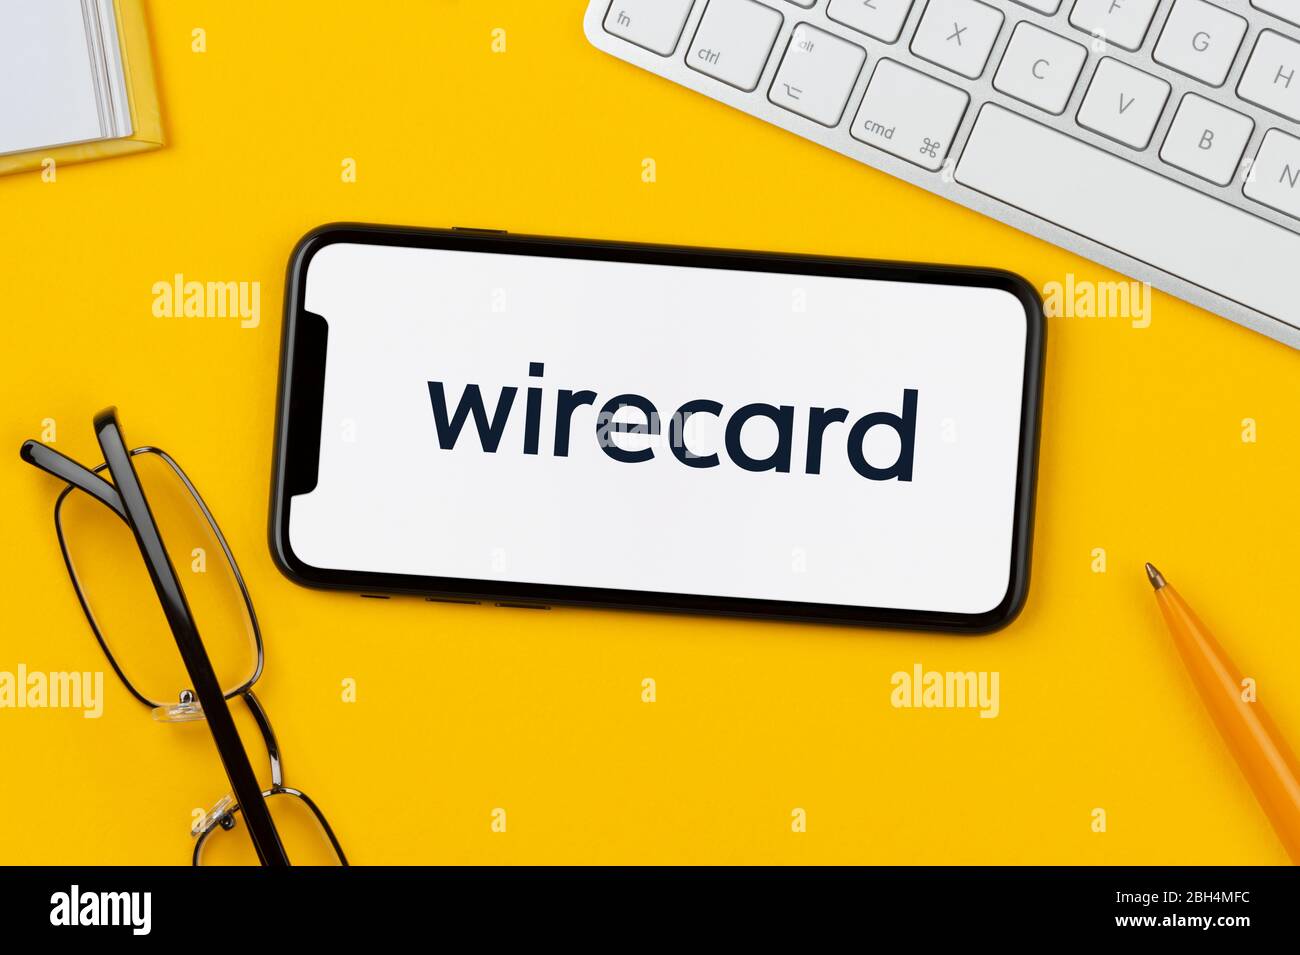 A smartphone showing the Wirecard logo rests on a yellow background along with a keyboard, glasses, pen and book (Editorial use only). Stock Photo